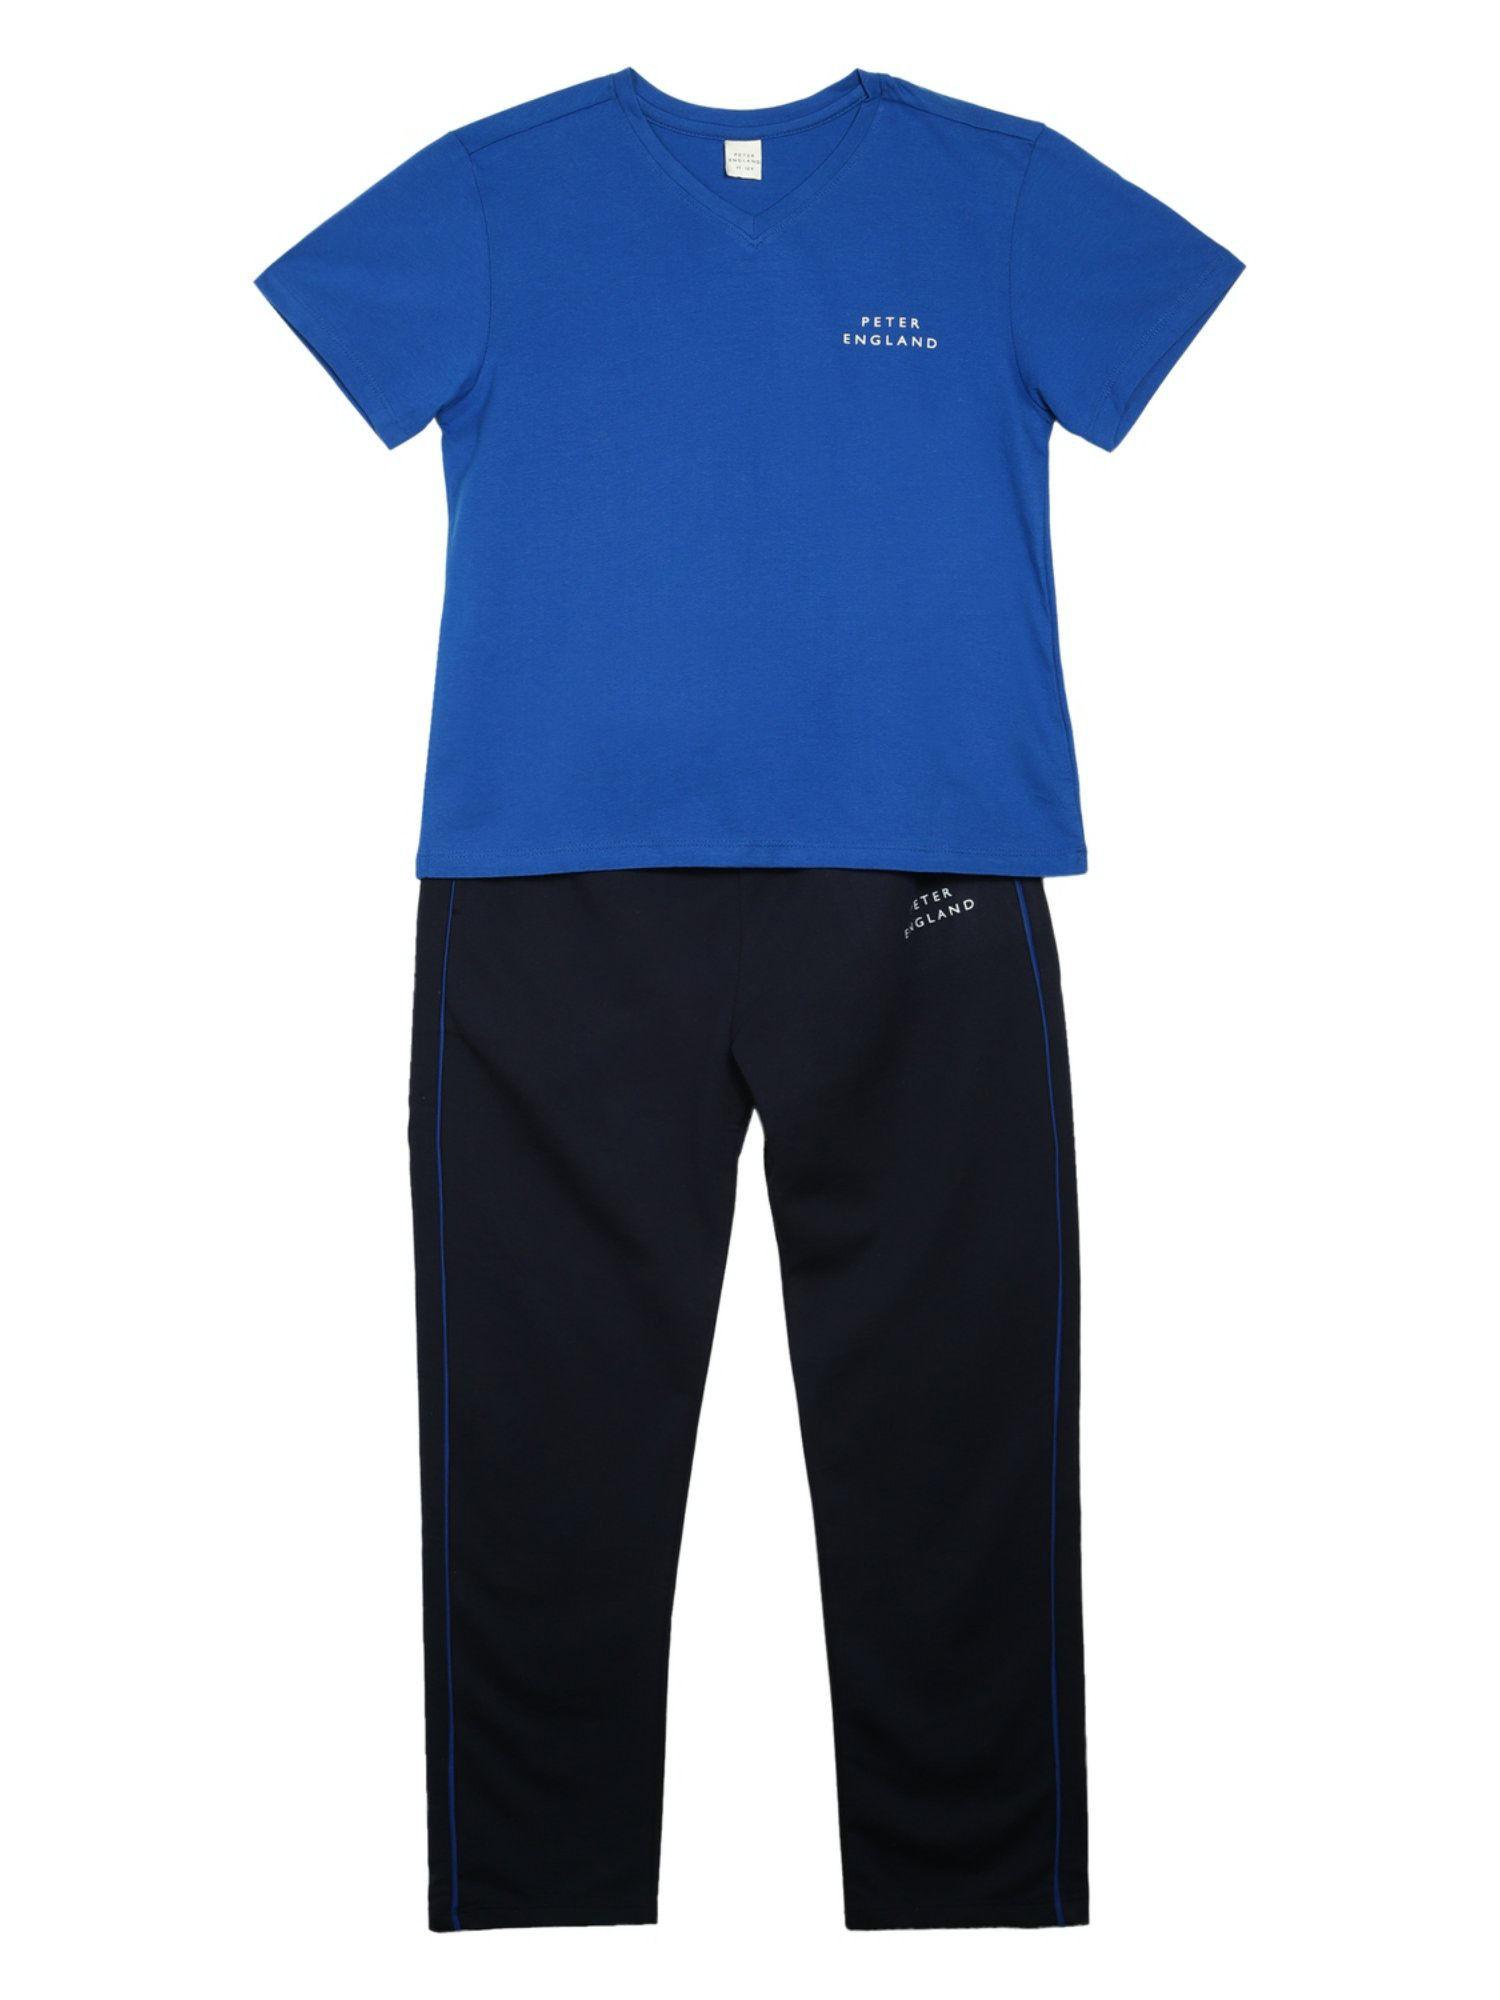 blue t-shirt and pants (set of 2)